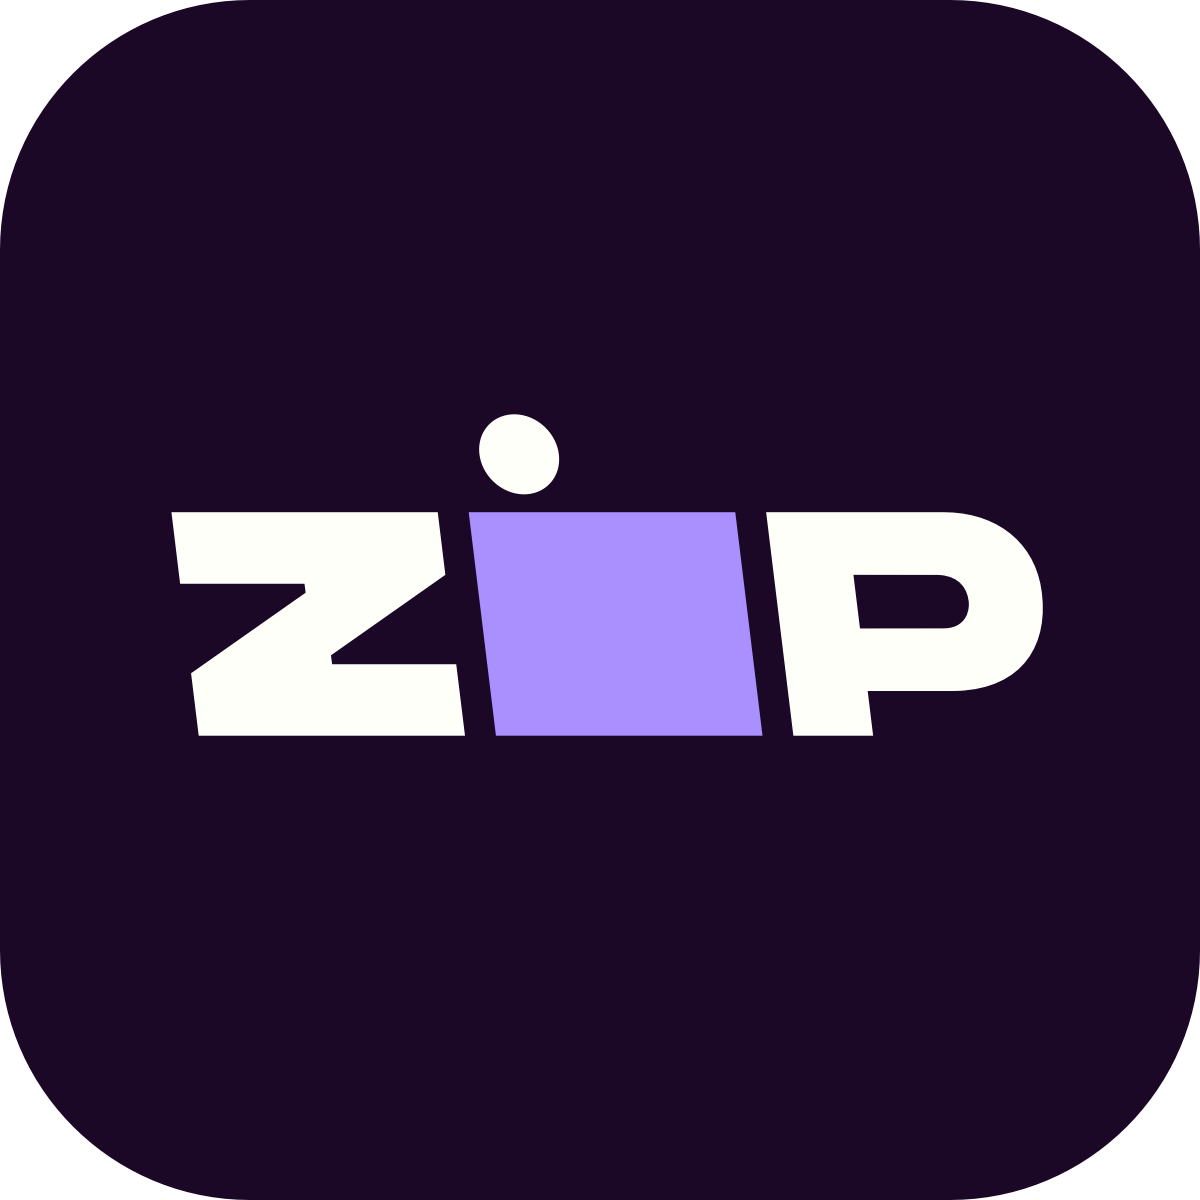 Hire Shopify Experts to integrate Zip (Quadpay) Widget app into a Shopify store